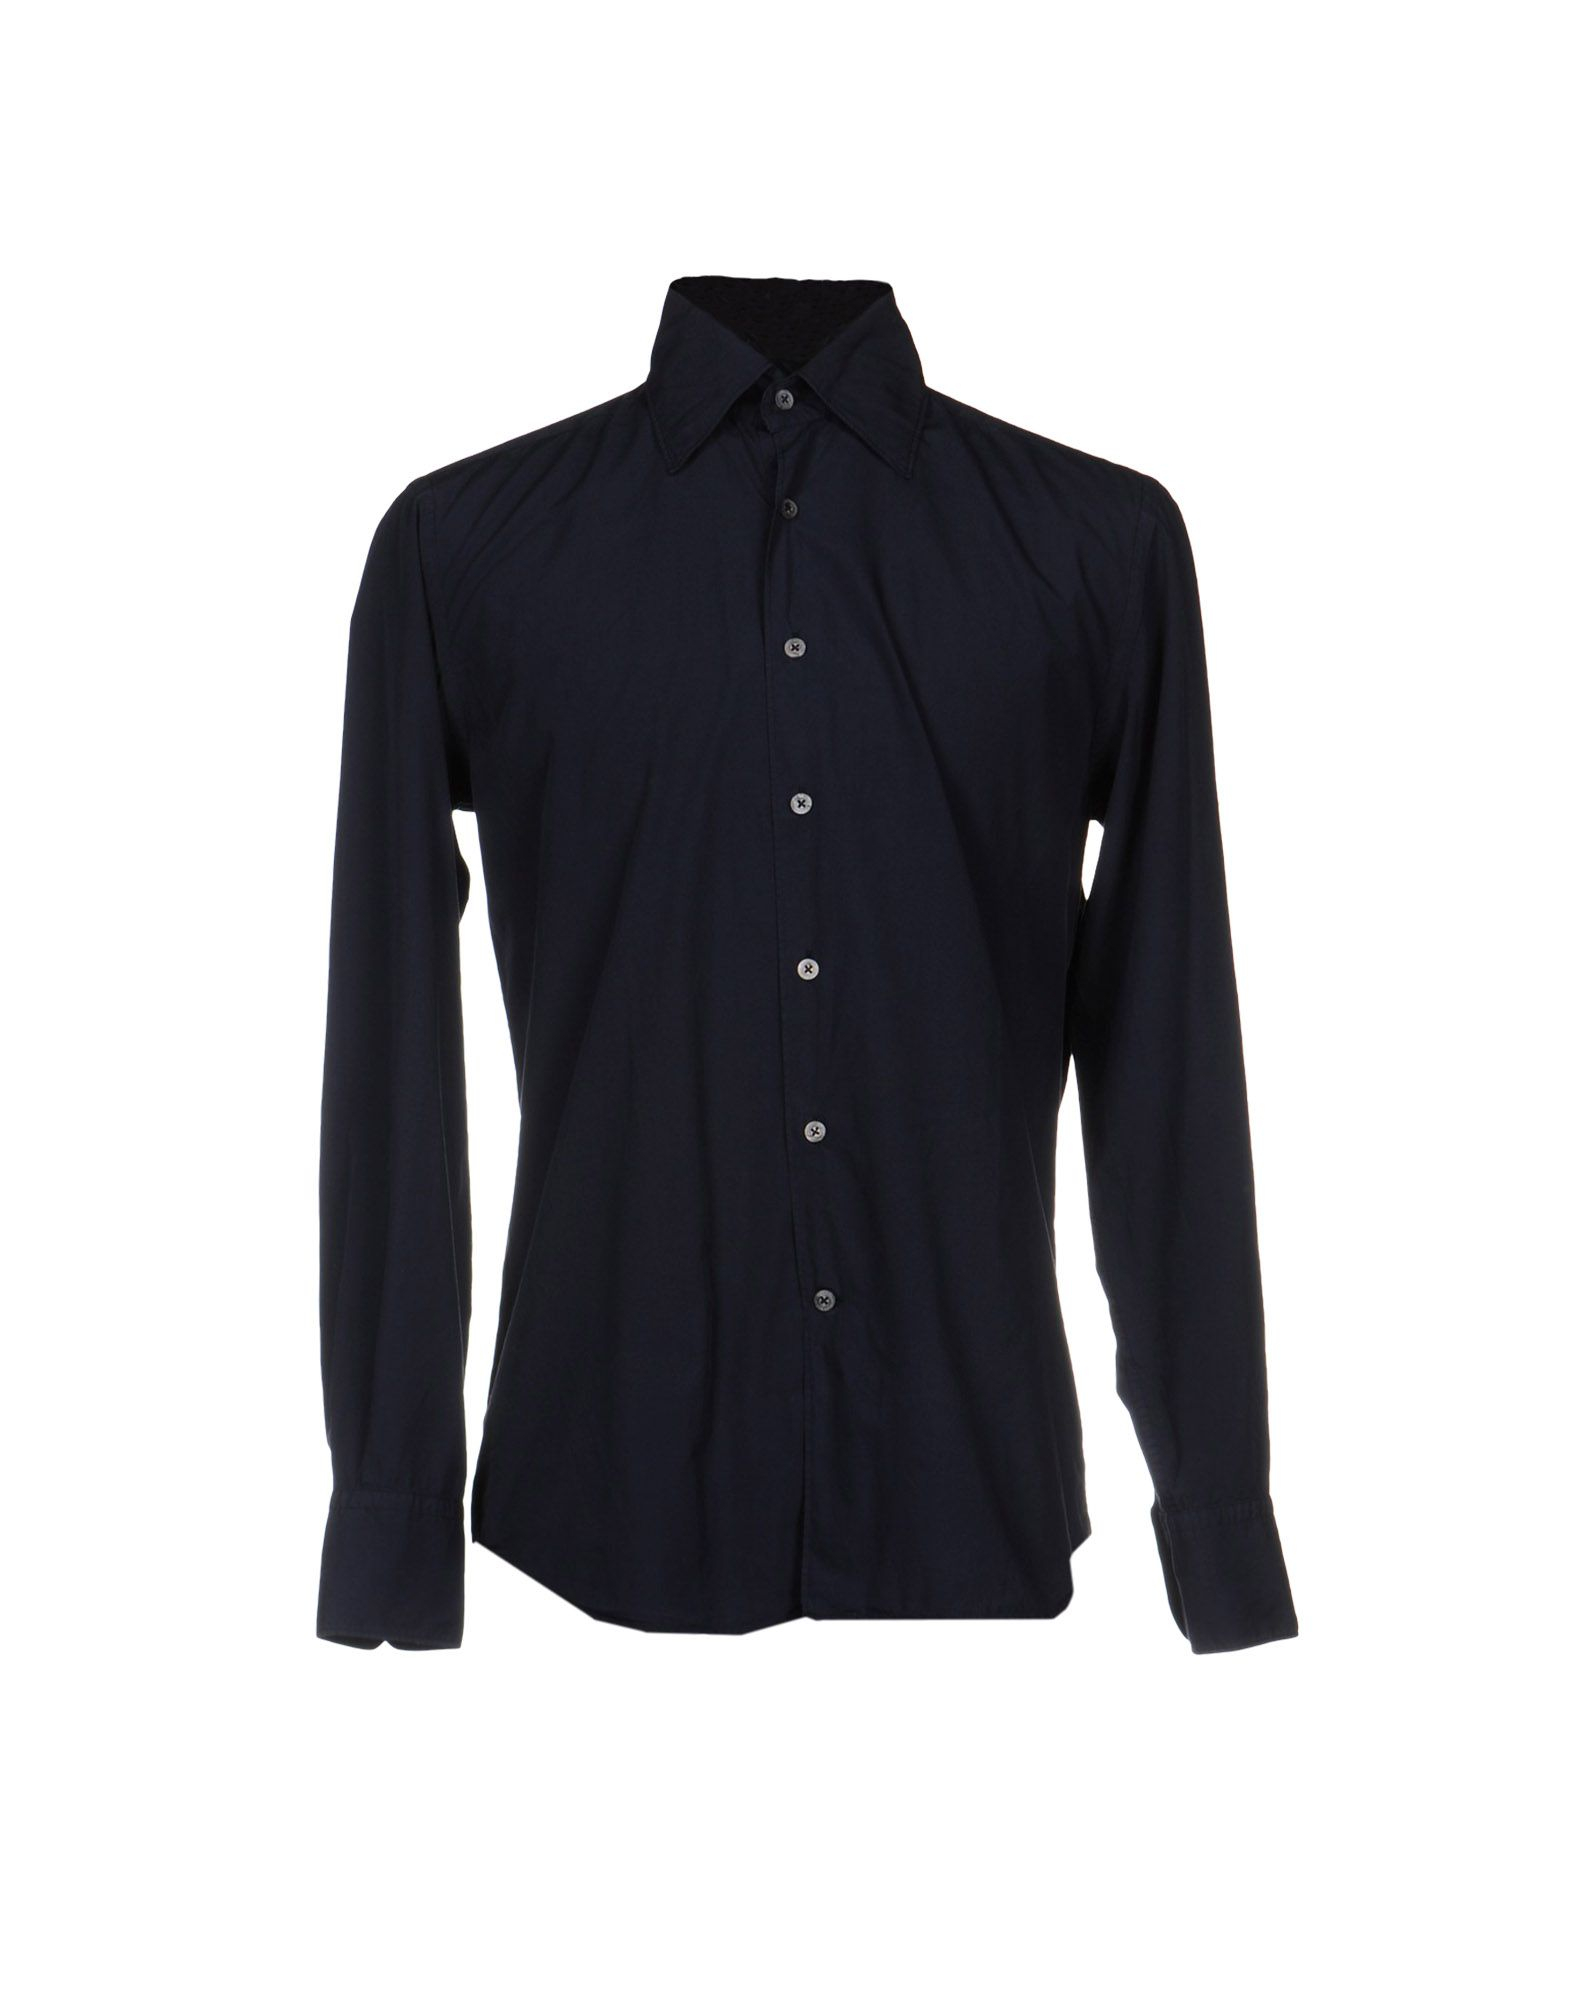 Lyst - Canali Shirt in Blue for Men